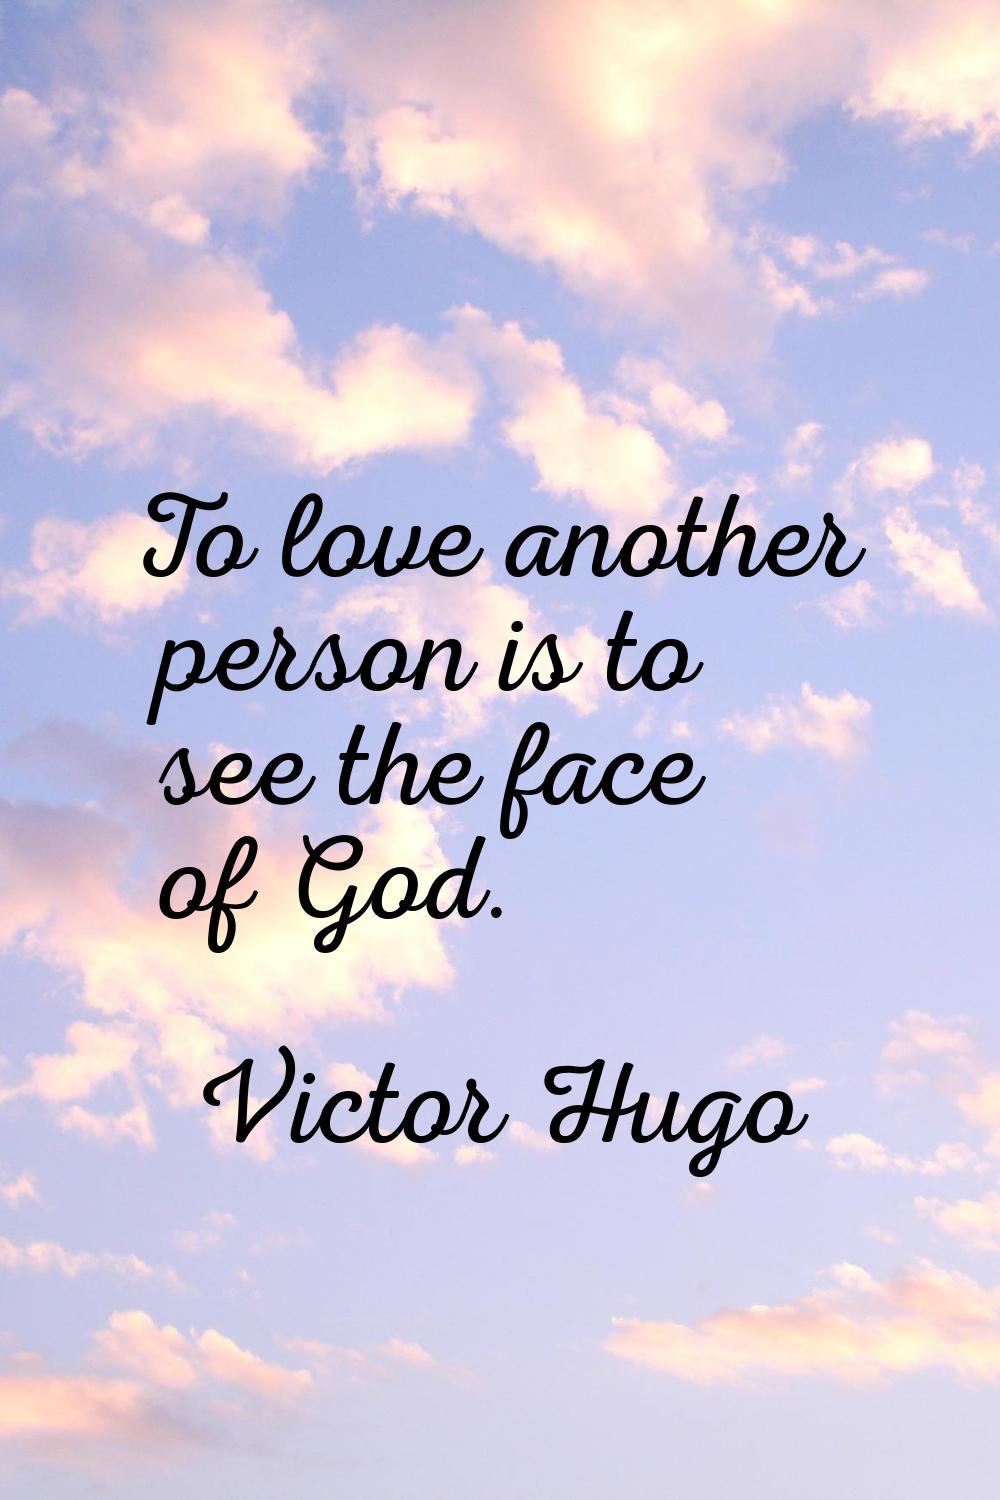 To love another person is to see the face of God.